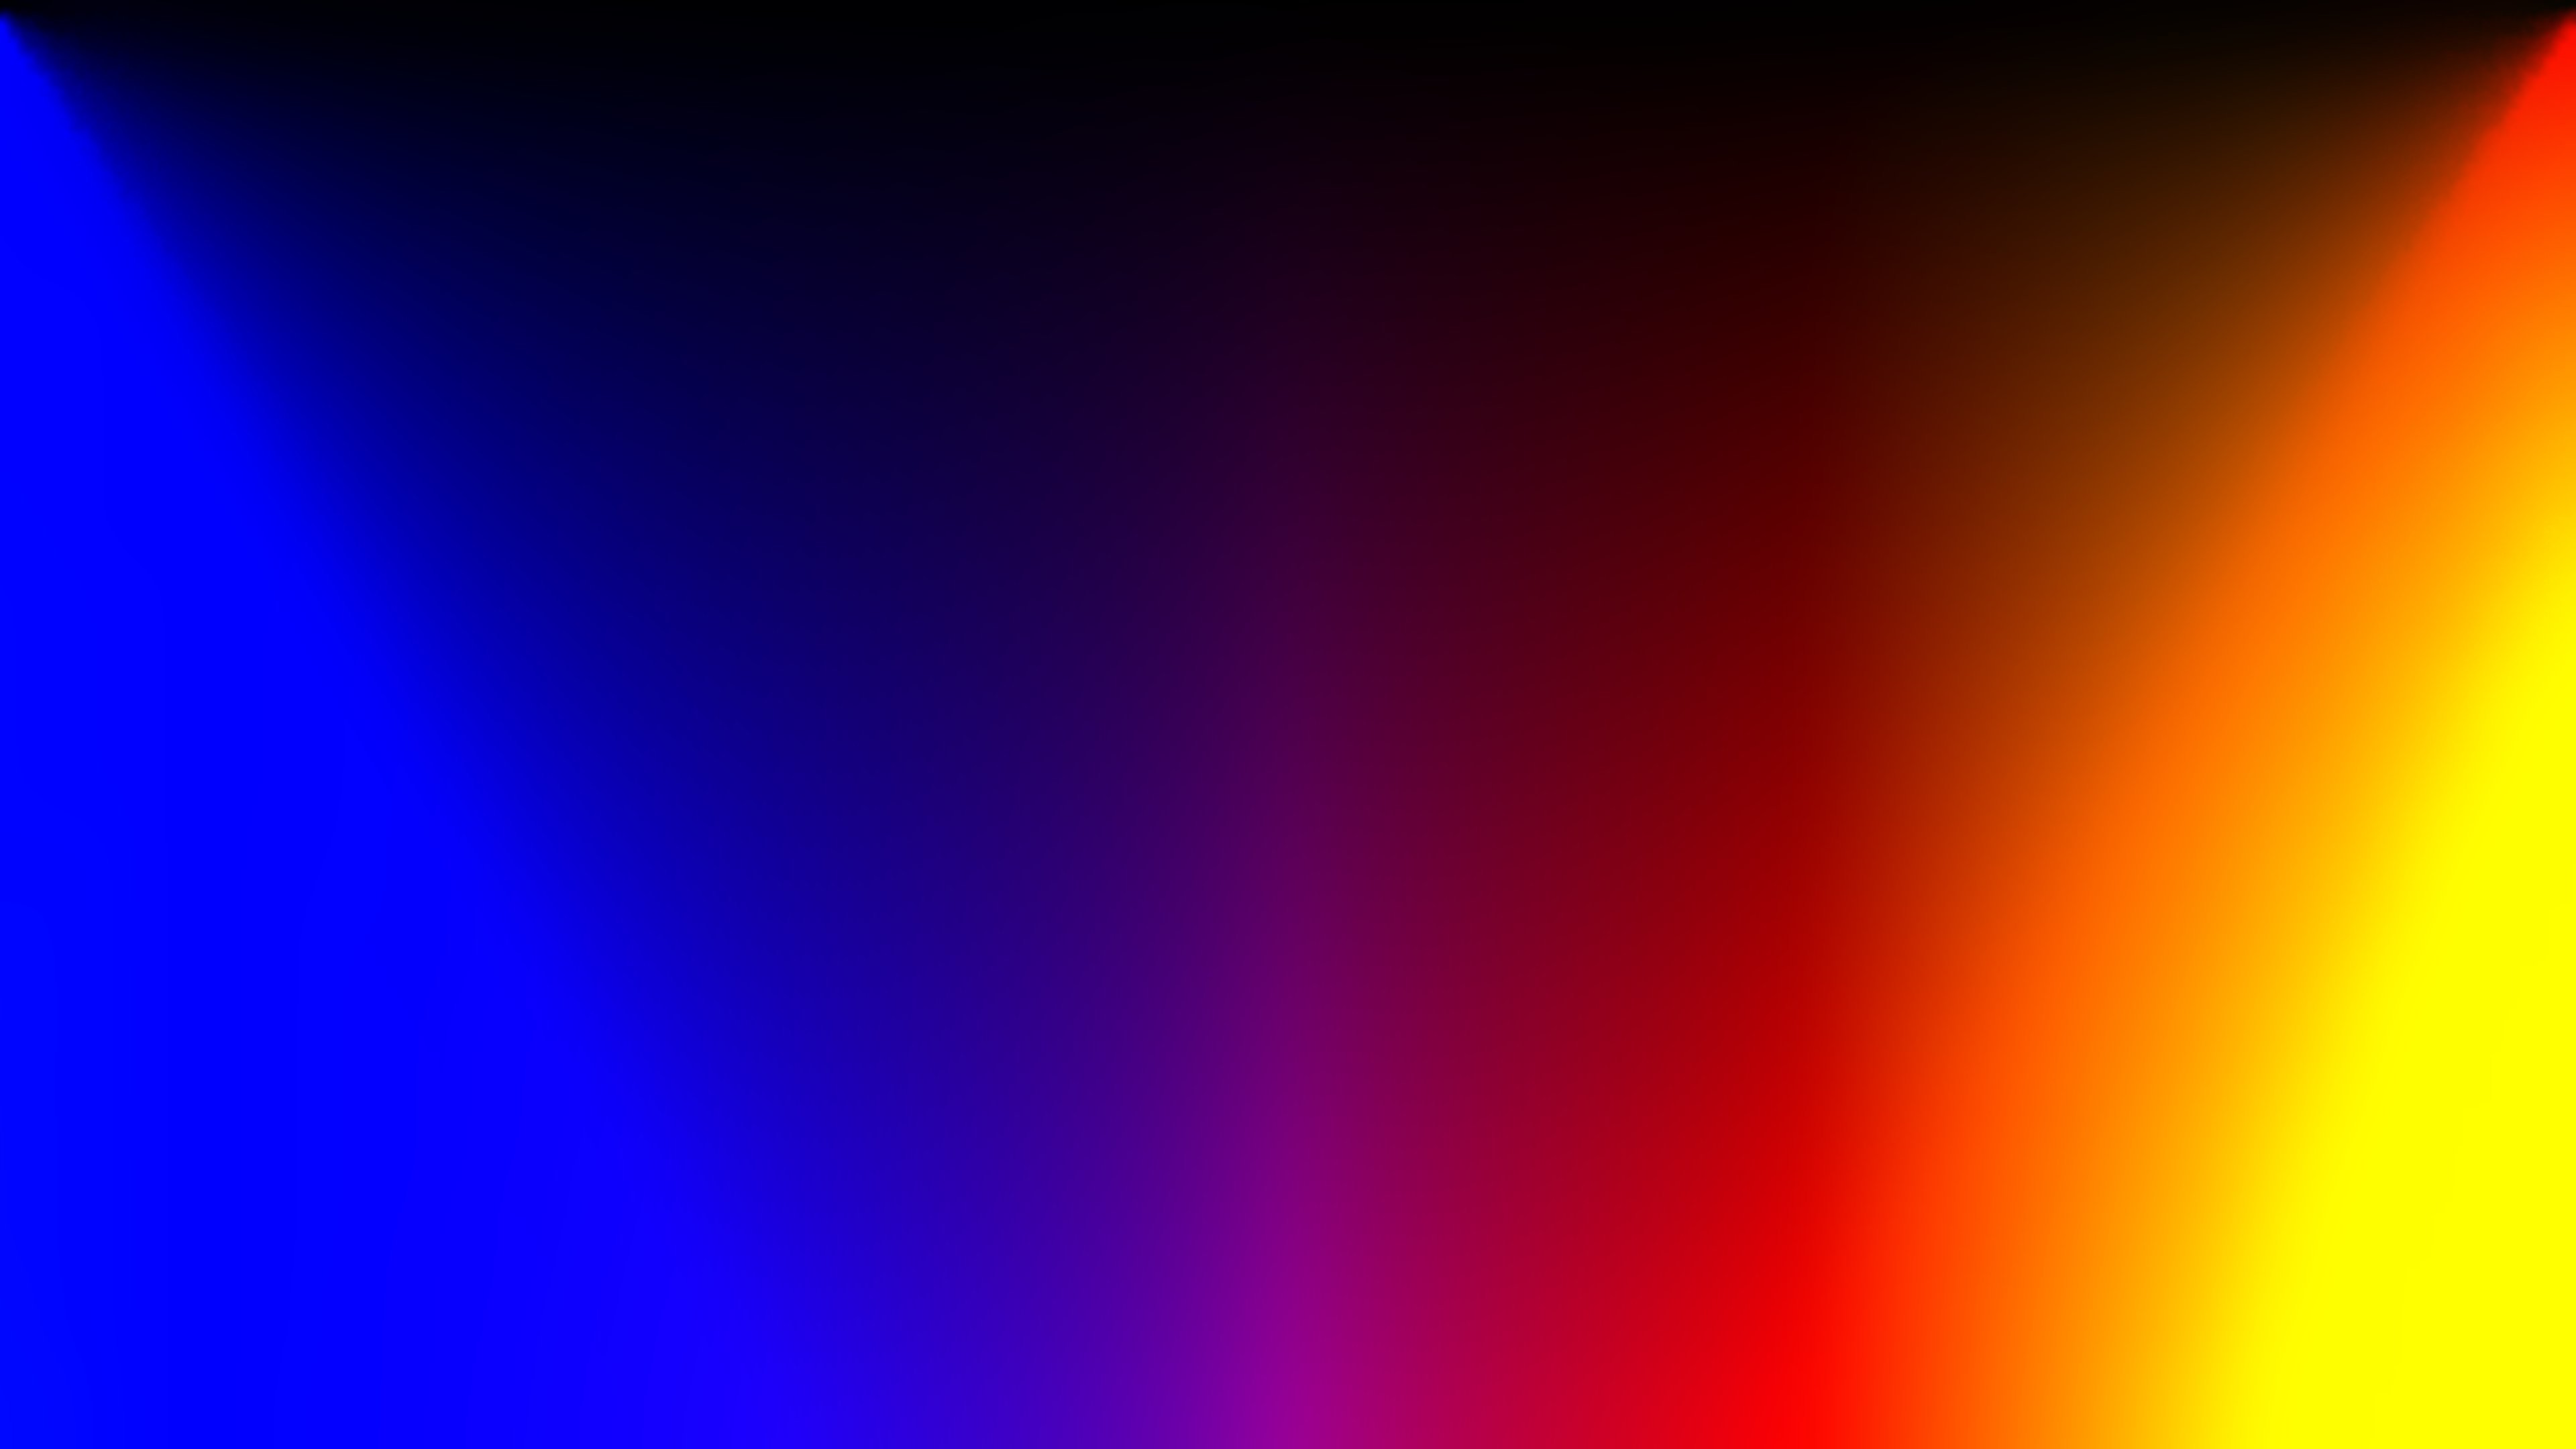 Colors colorful abstract blue purple red orange yellow wallpaper | | 931714  | WallpaperUP